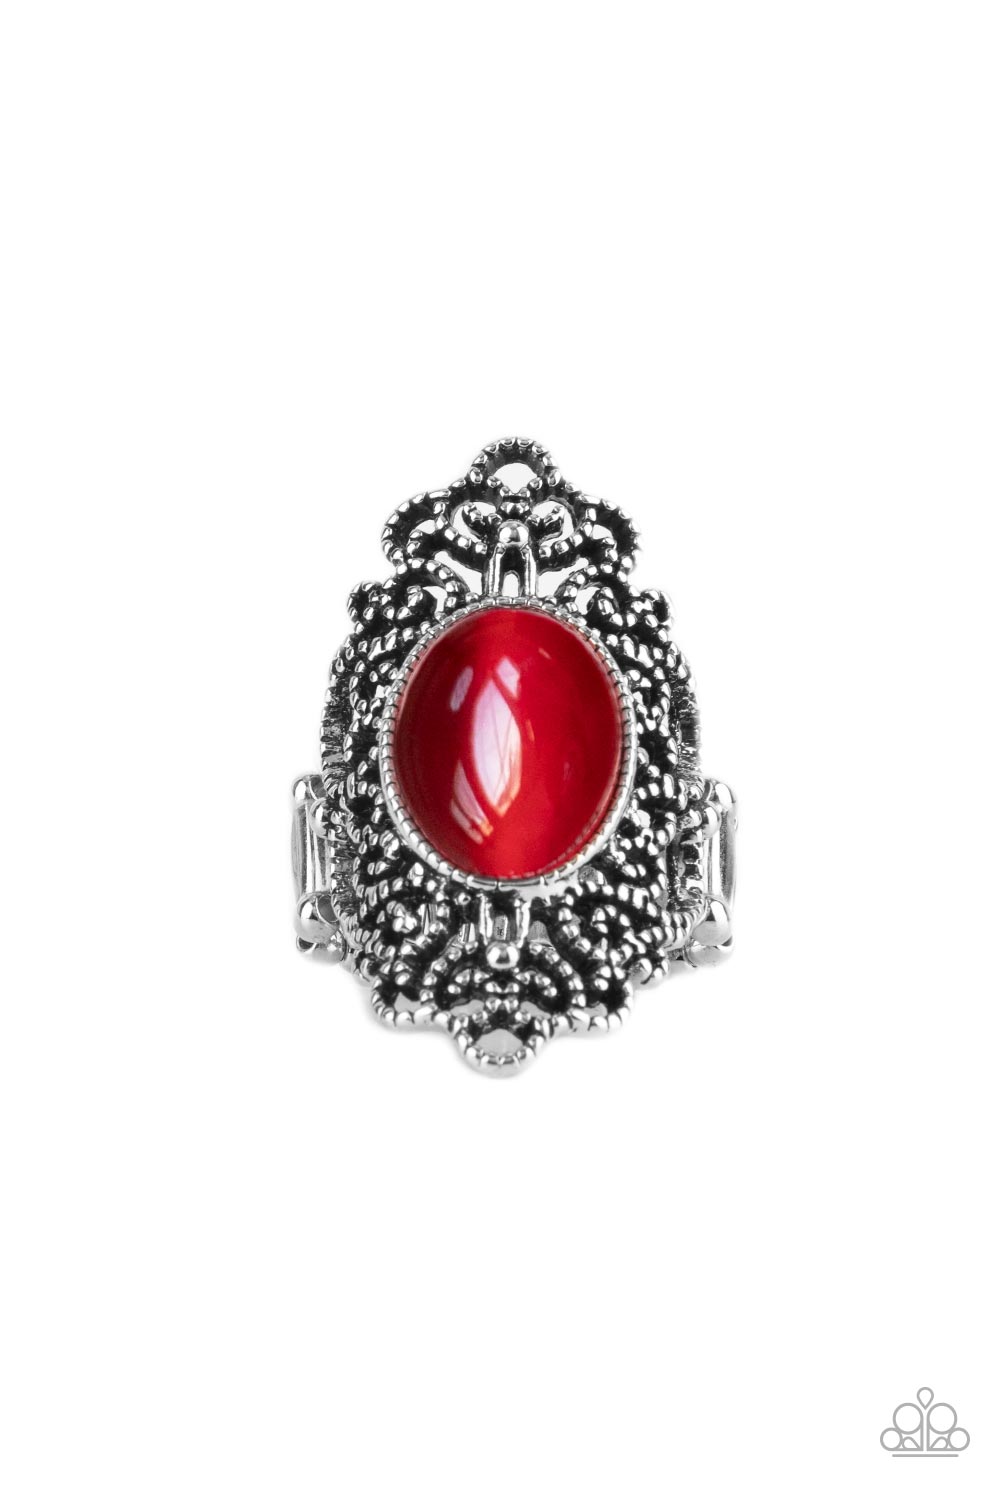 Paparazzi Accessories - Once Upon a Meadow - Red Rings oval Fire Whirl cat's eye stone is pressed into the center of a backdrop of studded vine-like filigree, creating an enchanting centerpiece atop the finger. Features a stretchy band for a flexible fit.  Sold as one individual ring.